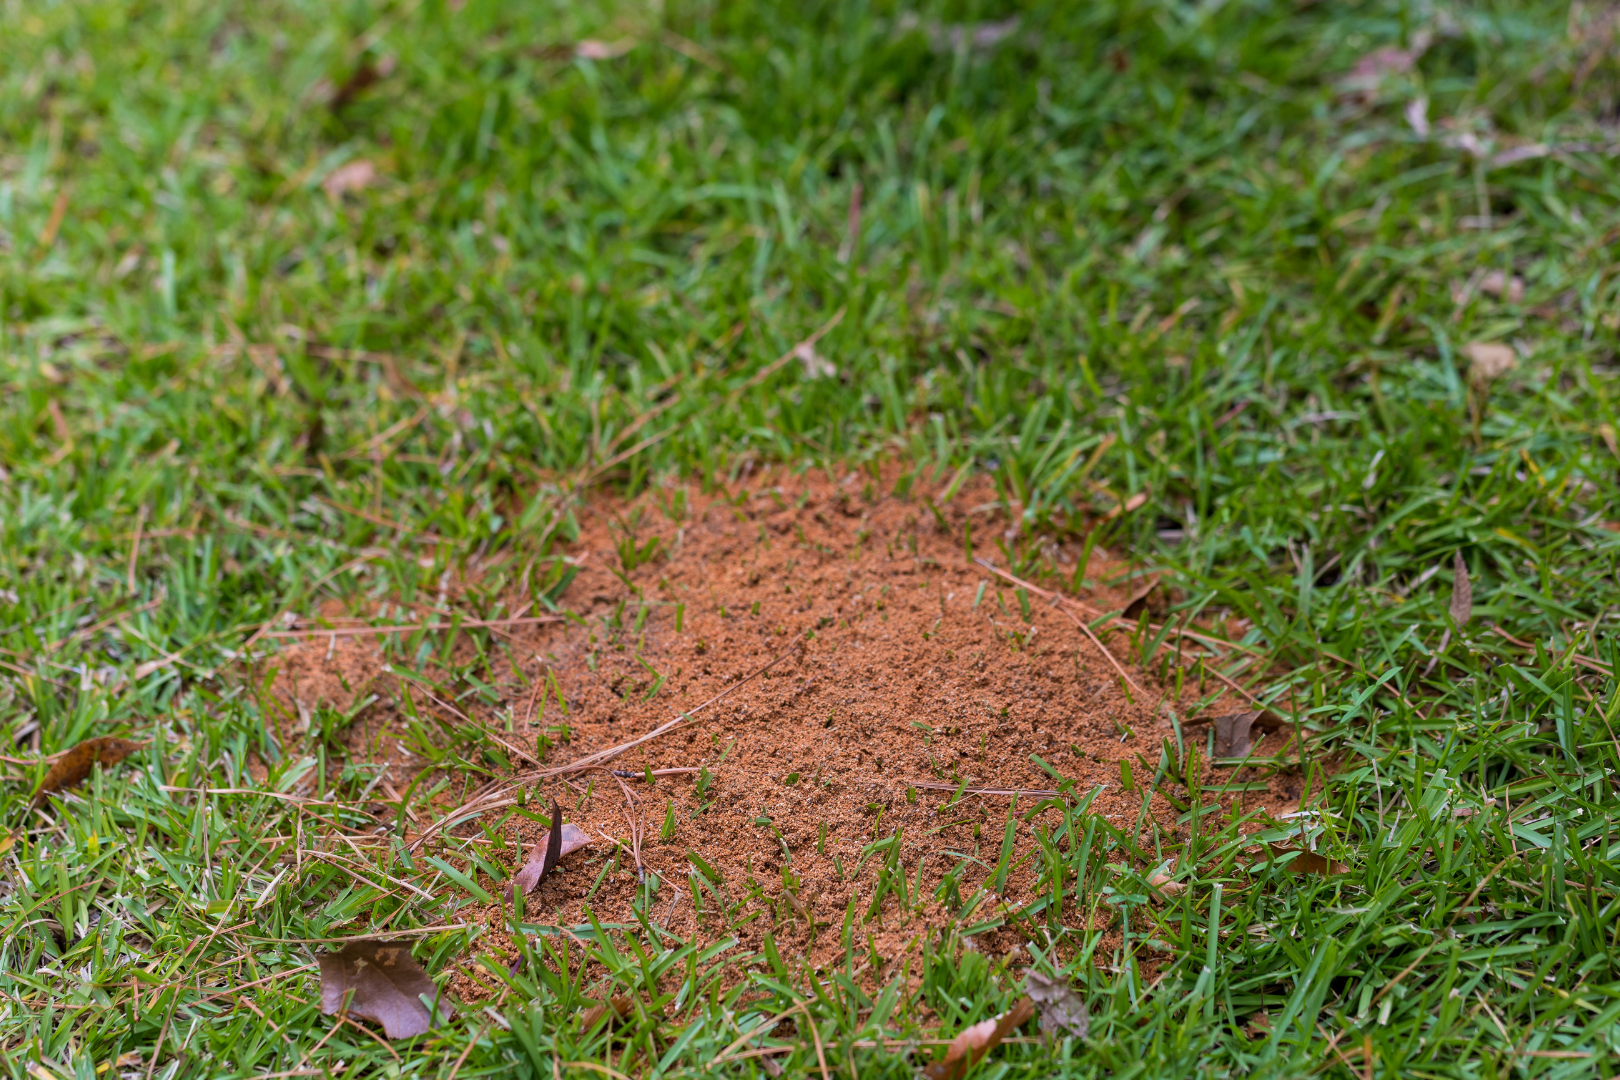 sign of an infestation is seeing live ants in your home